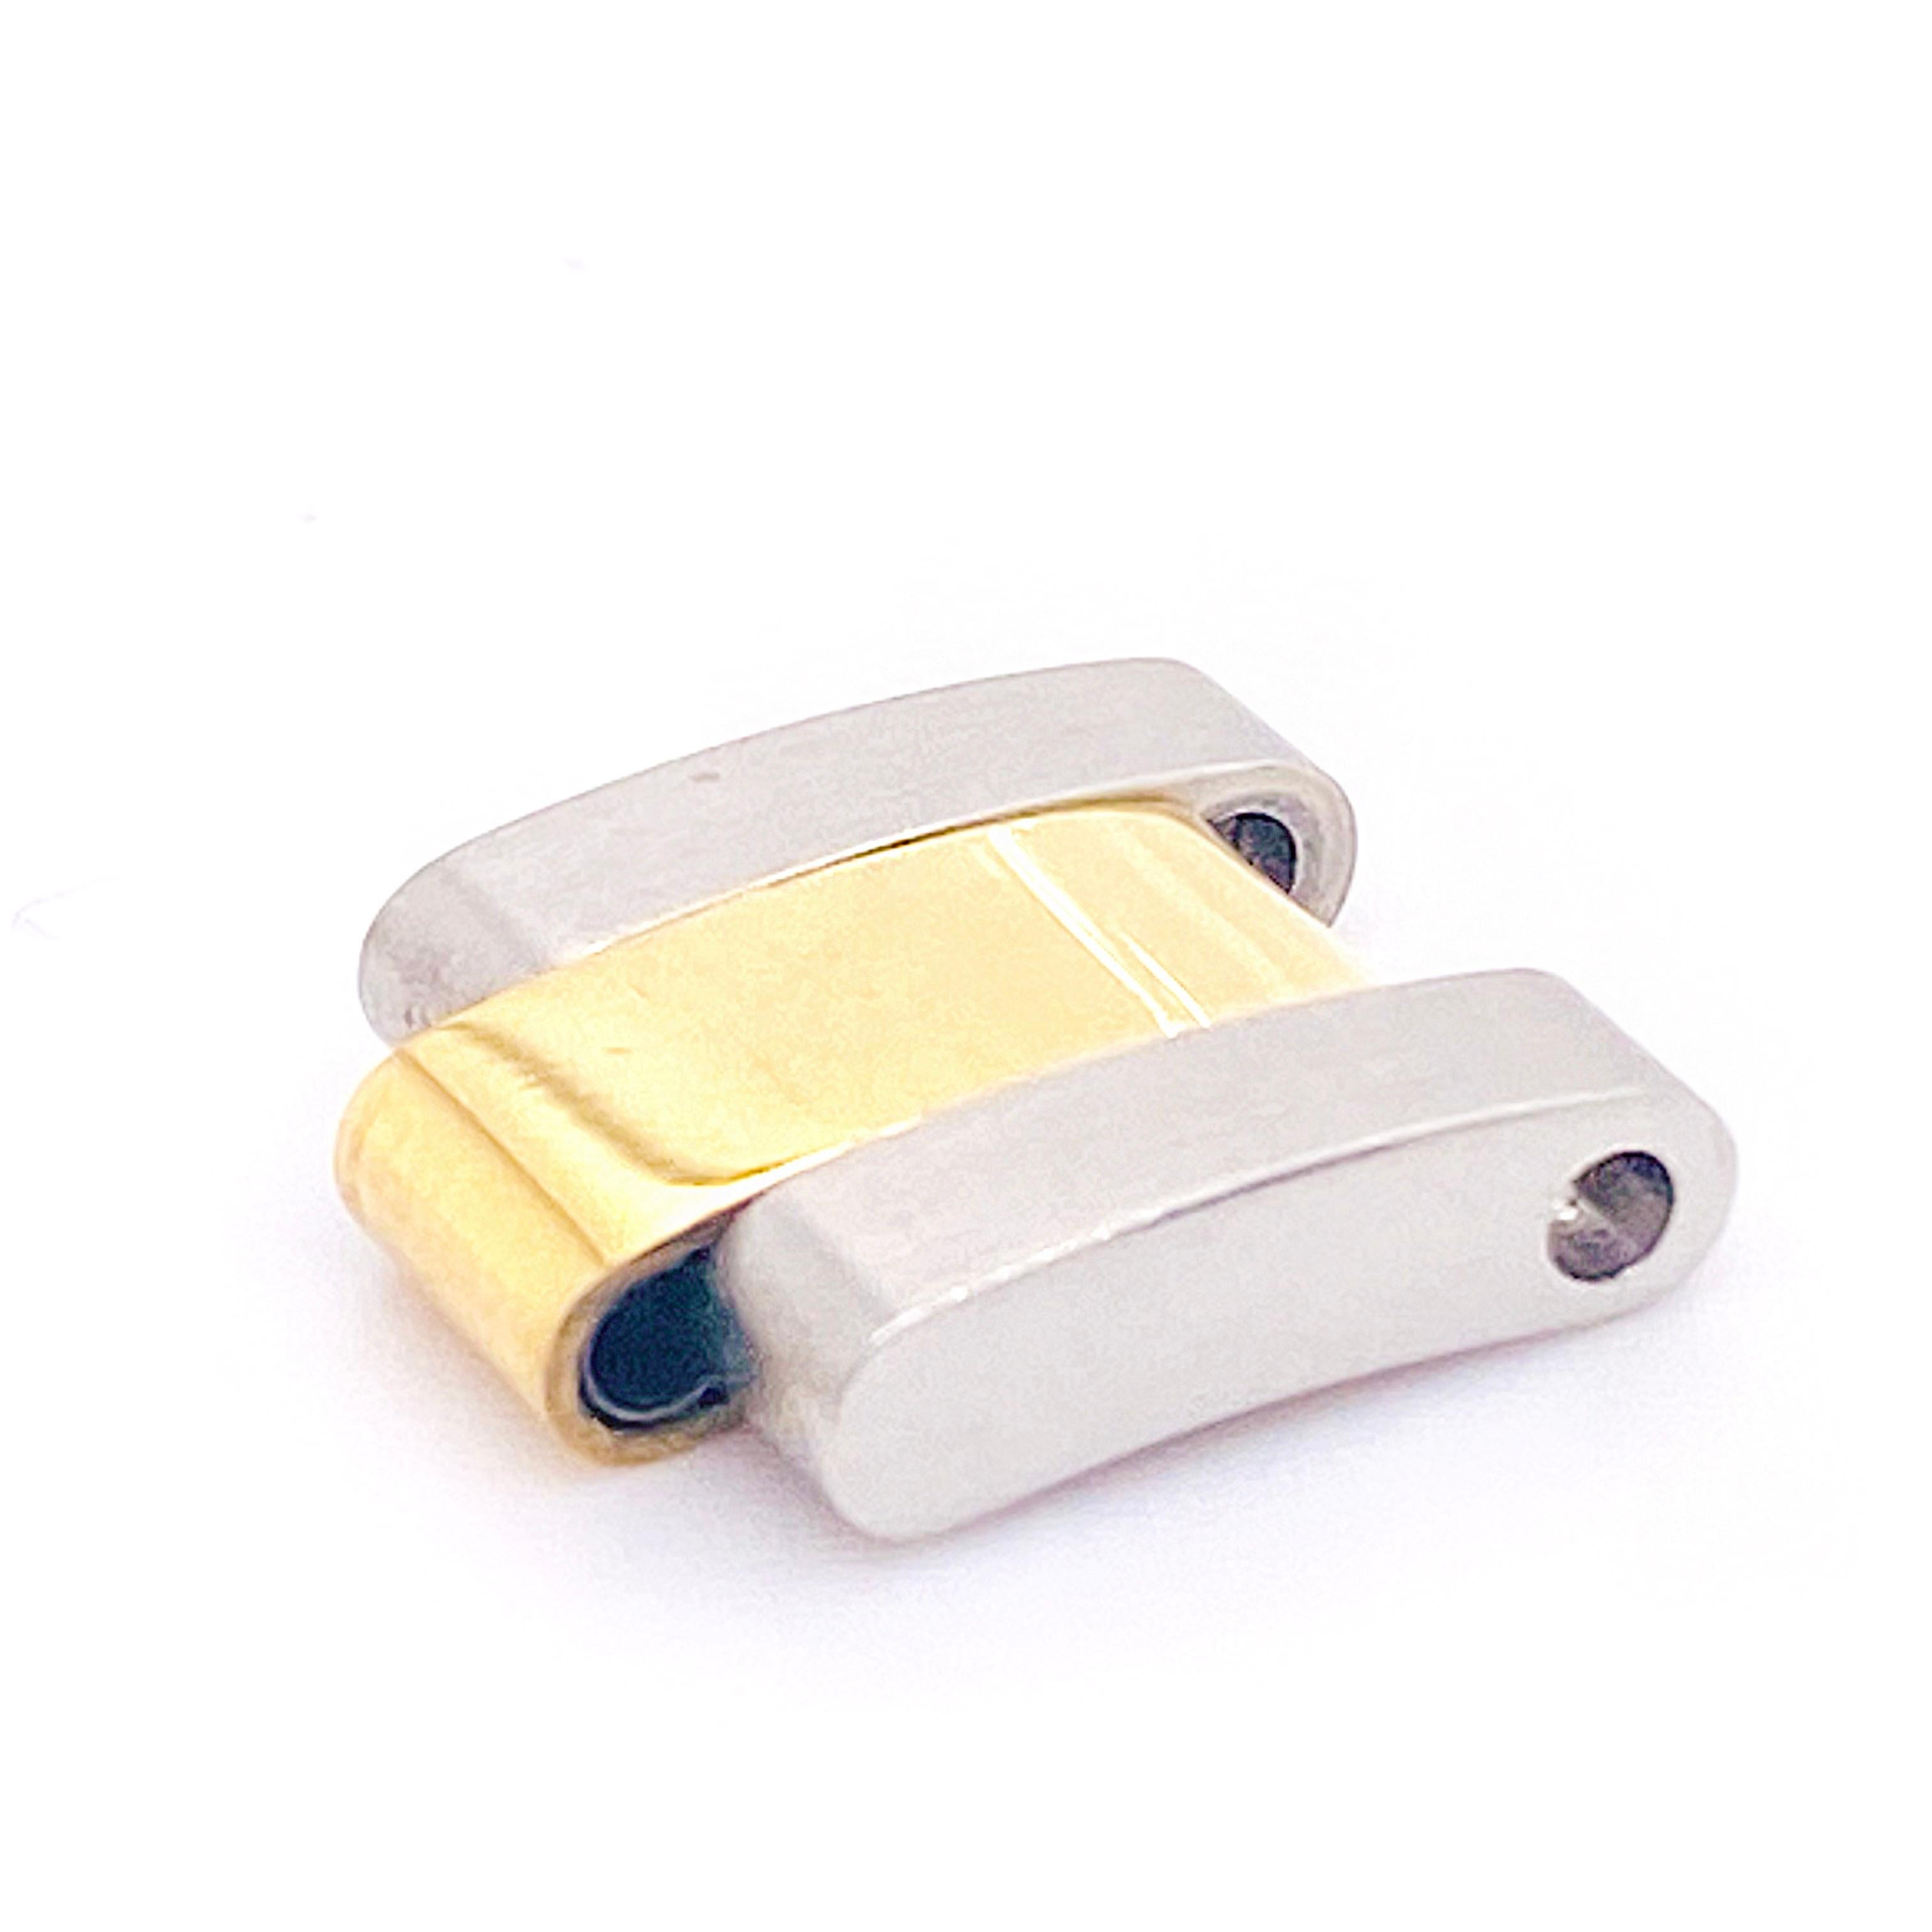 This link is a two-tone ladies watch link. This can be the perfect extender for your watch.